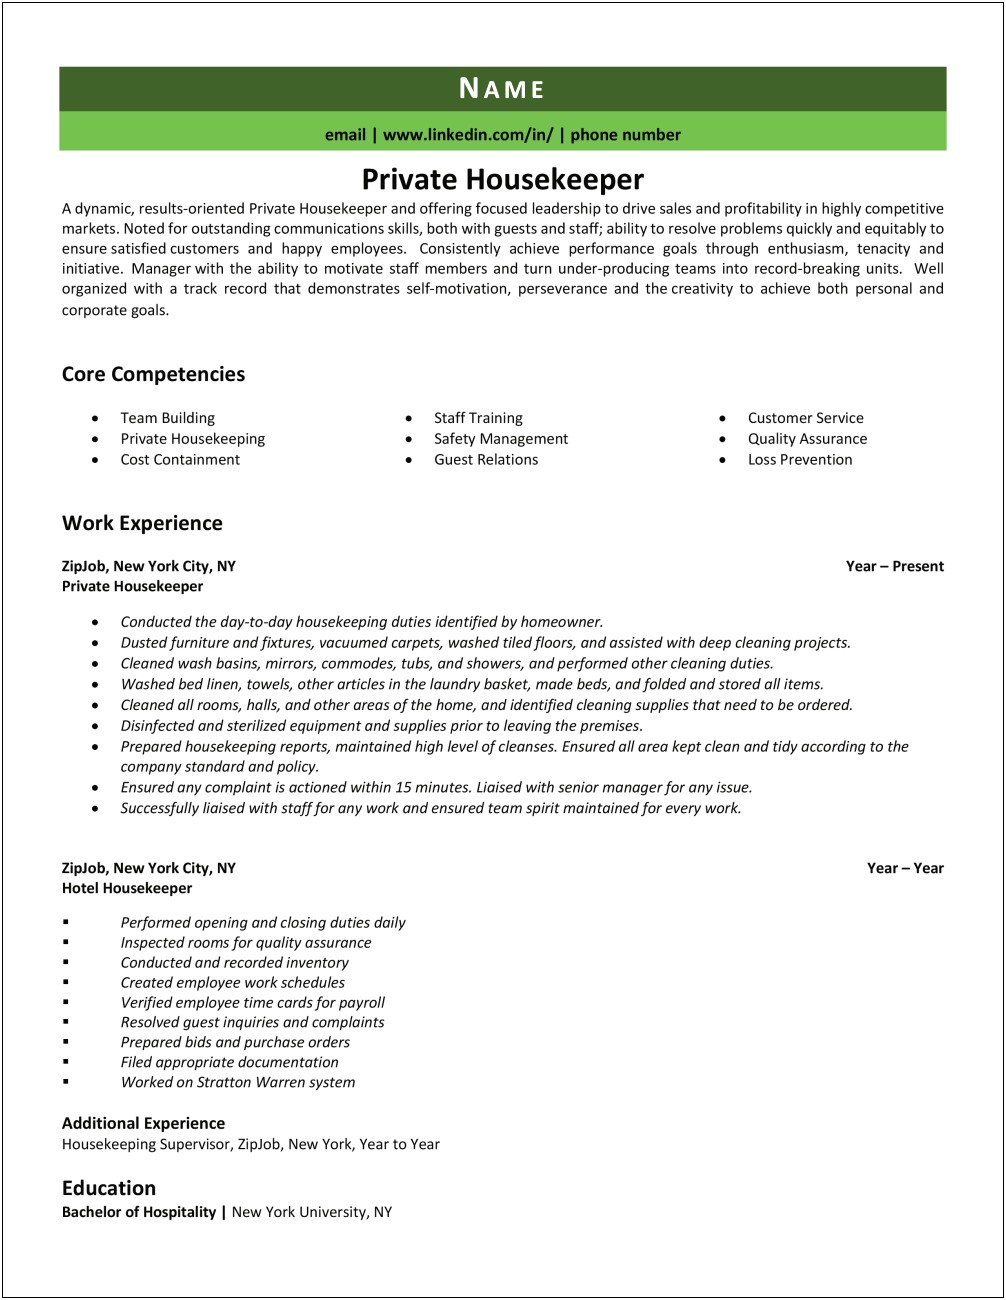 Resume With Housekeeping And Laundry Experience